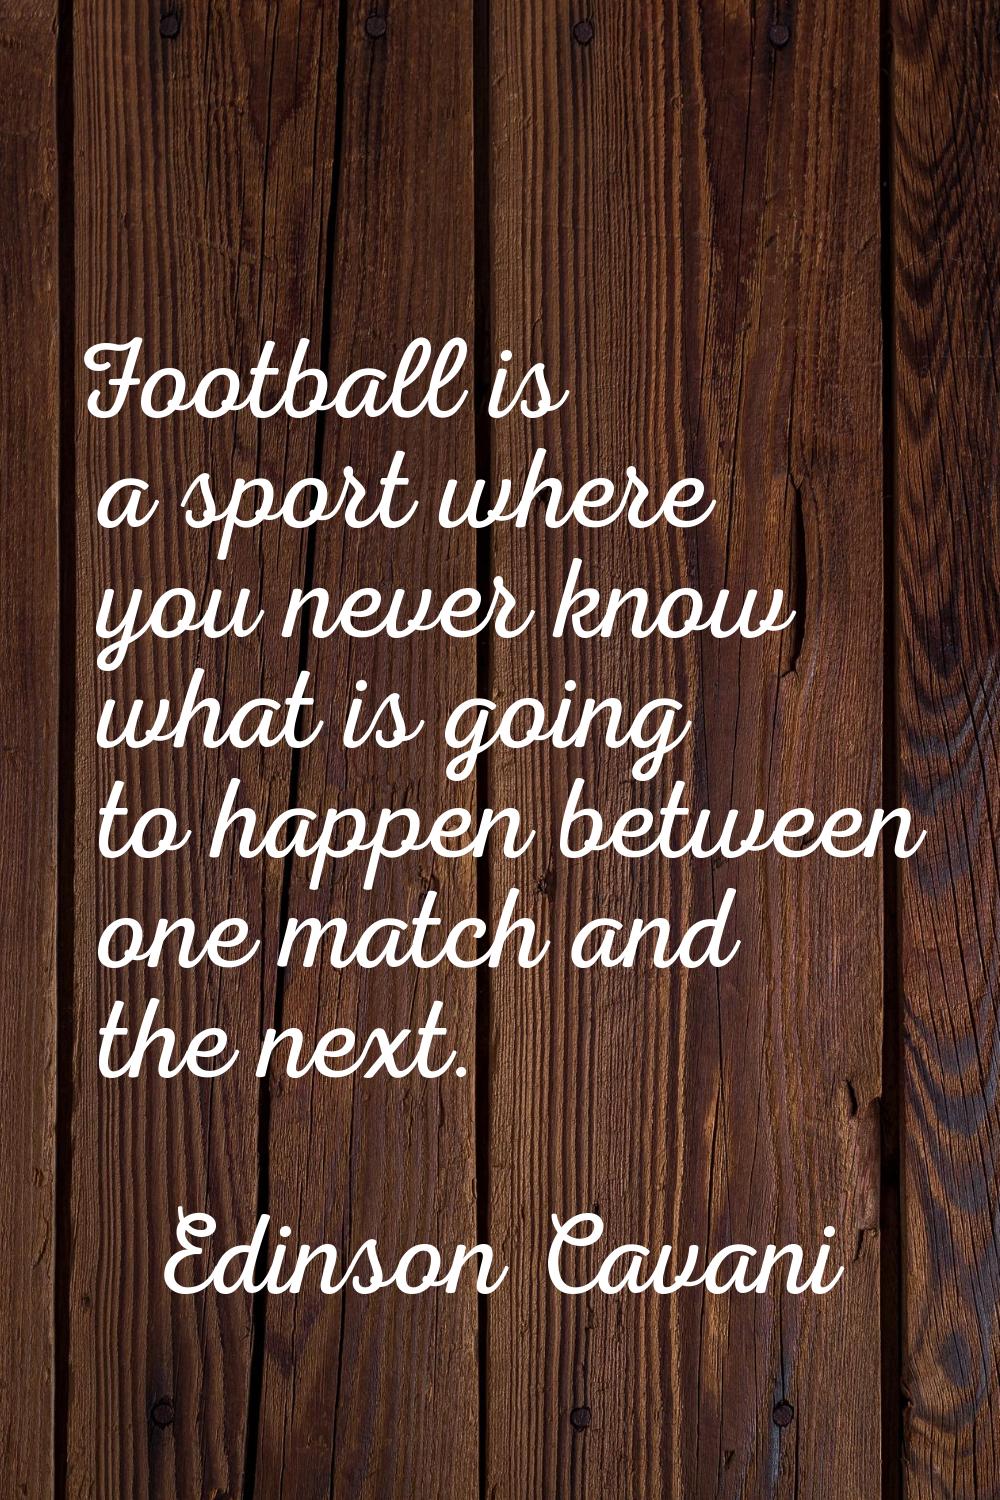 Football is a sport where you never know what is going to happen between one match and the next.